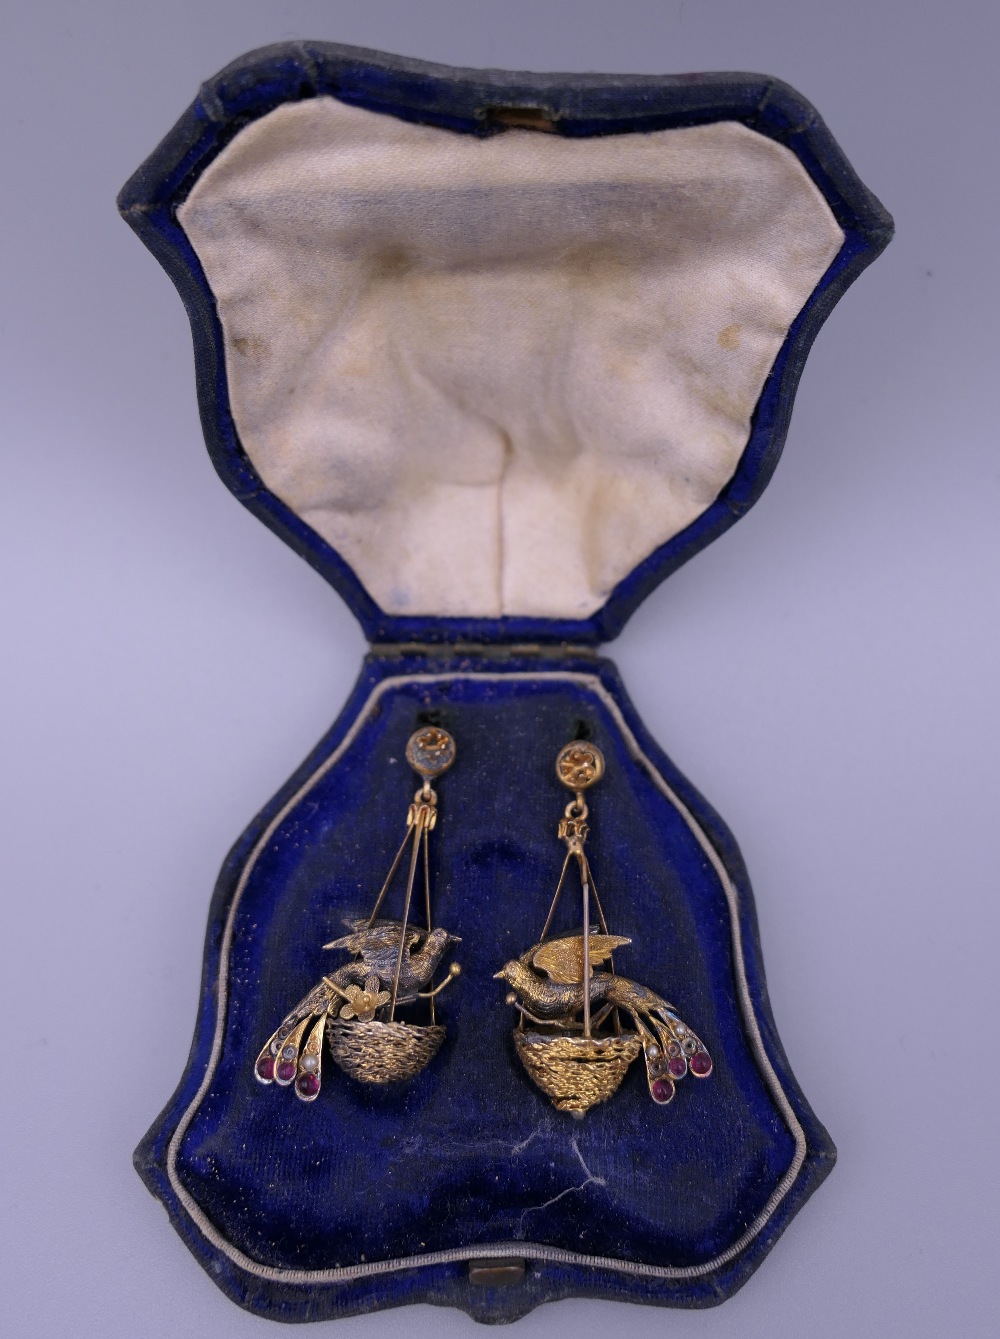 A pair of Victorian unmarked birds in nest earrings, in original fitted box. 3.5 cm high.